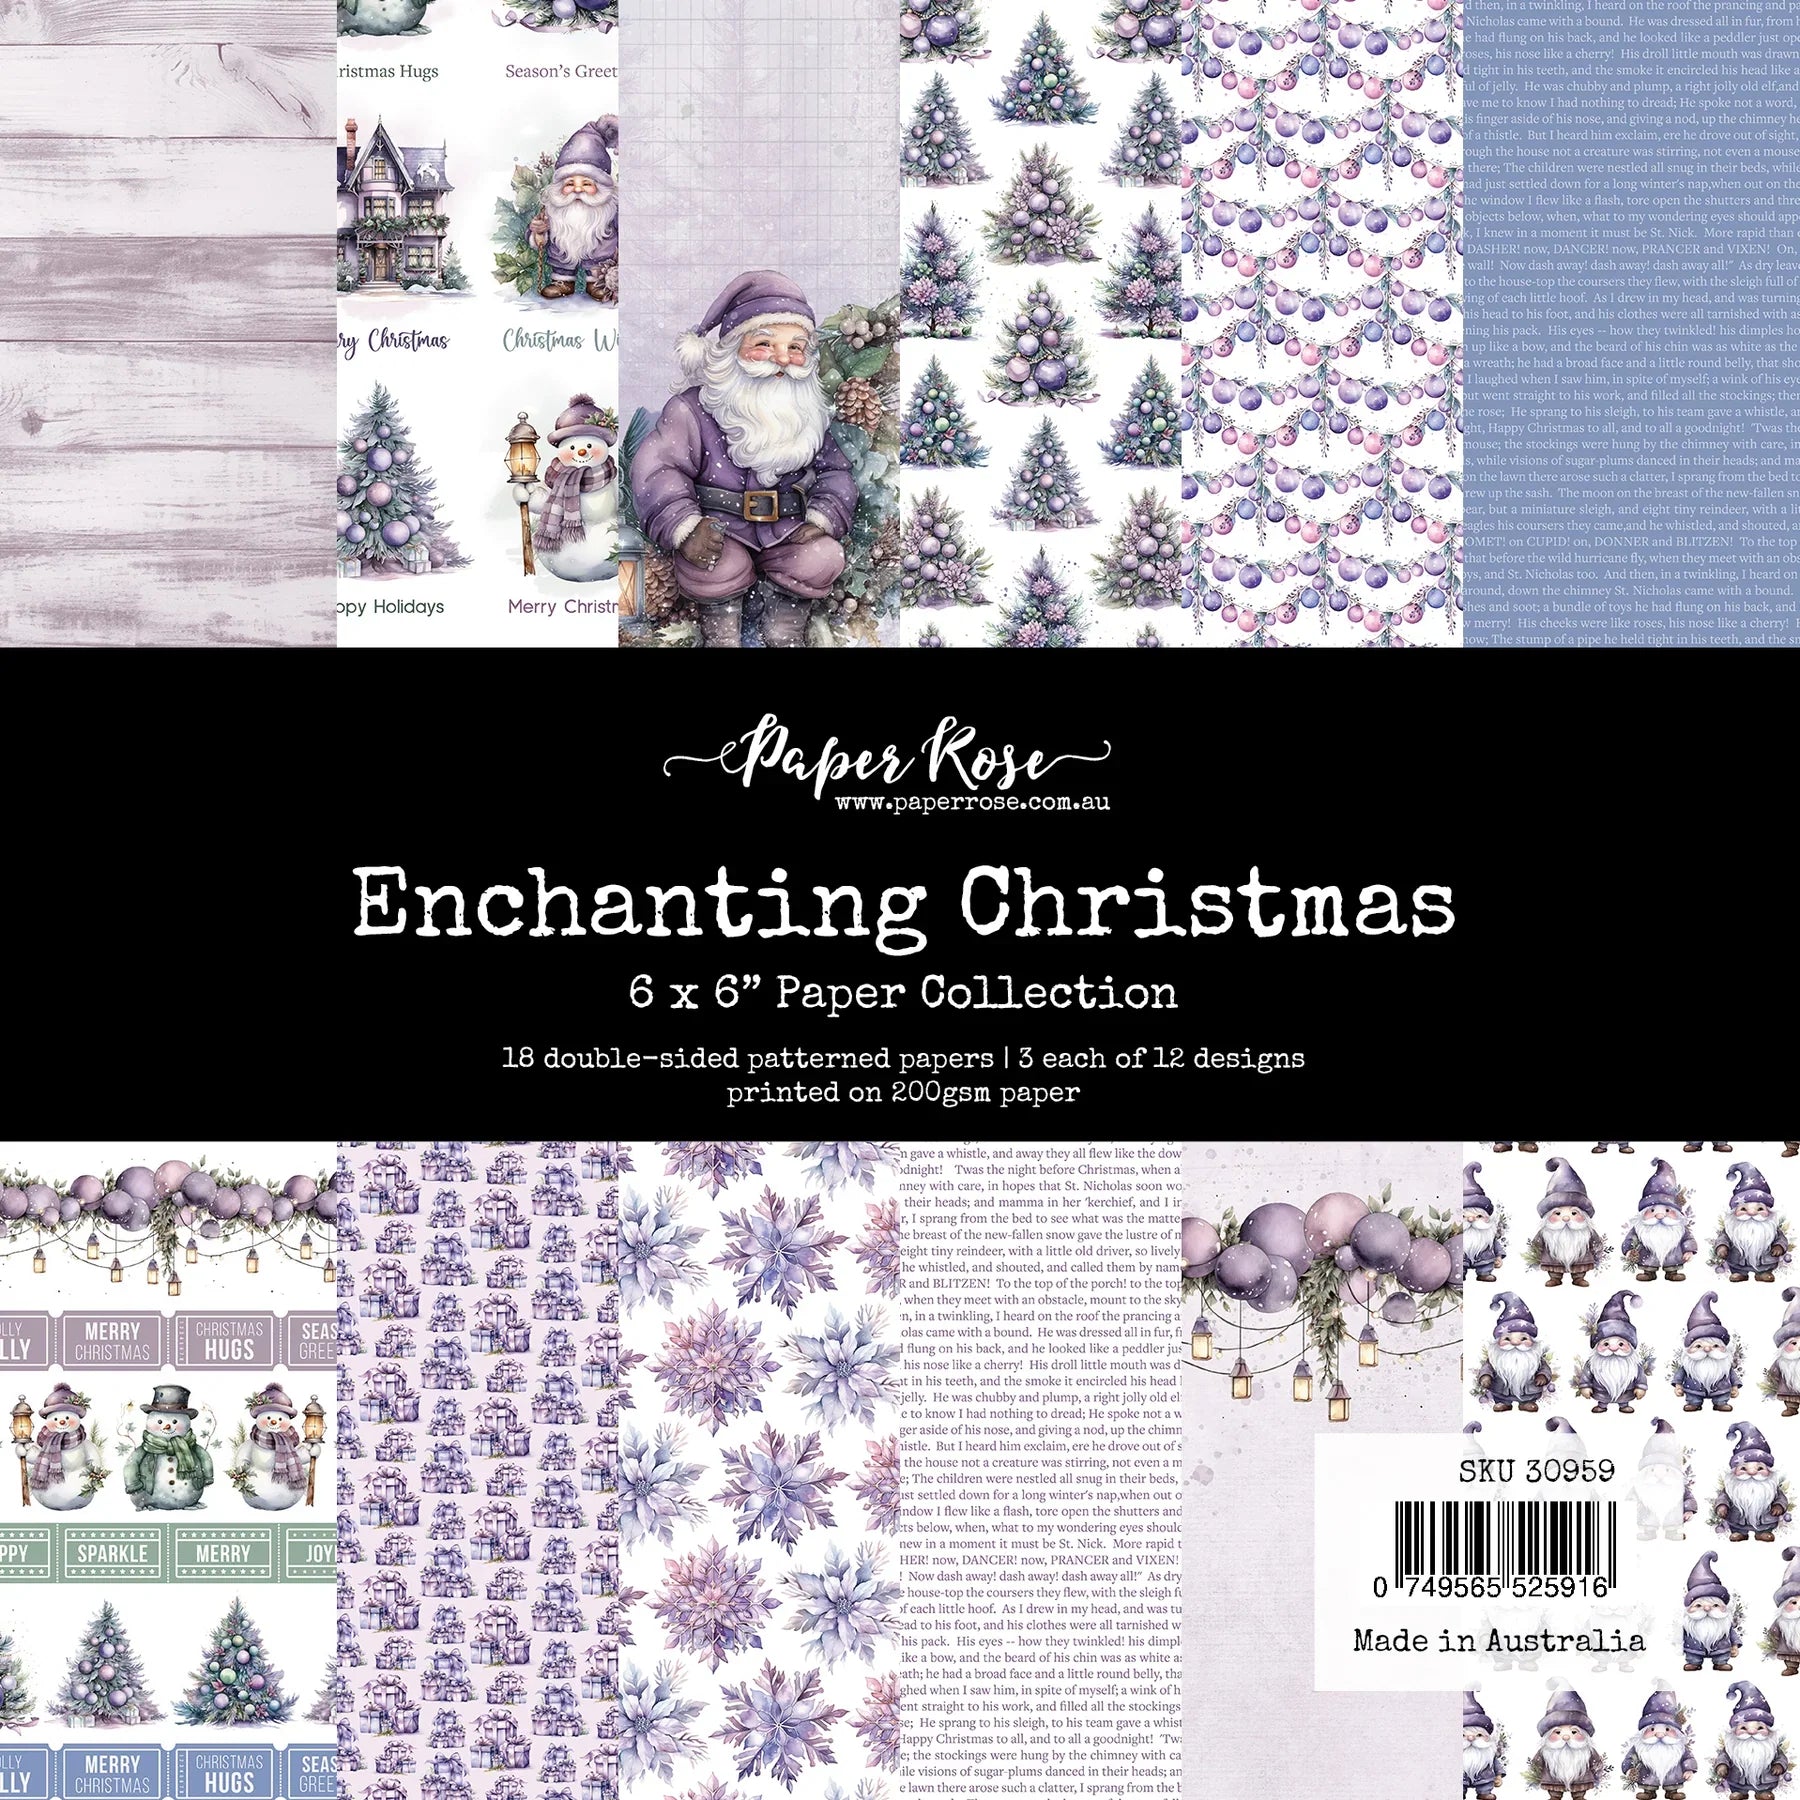 Enchanting Christmas 6x6 Paper Collection